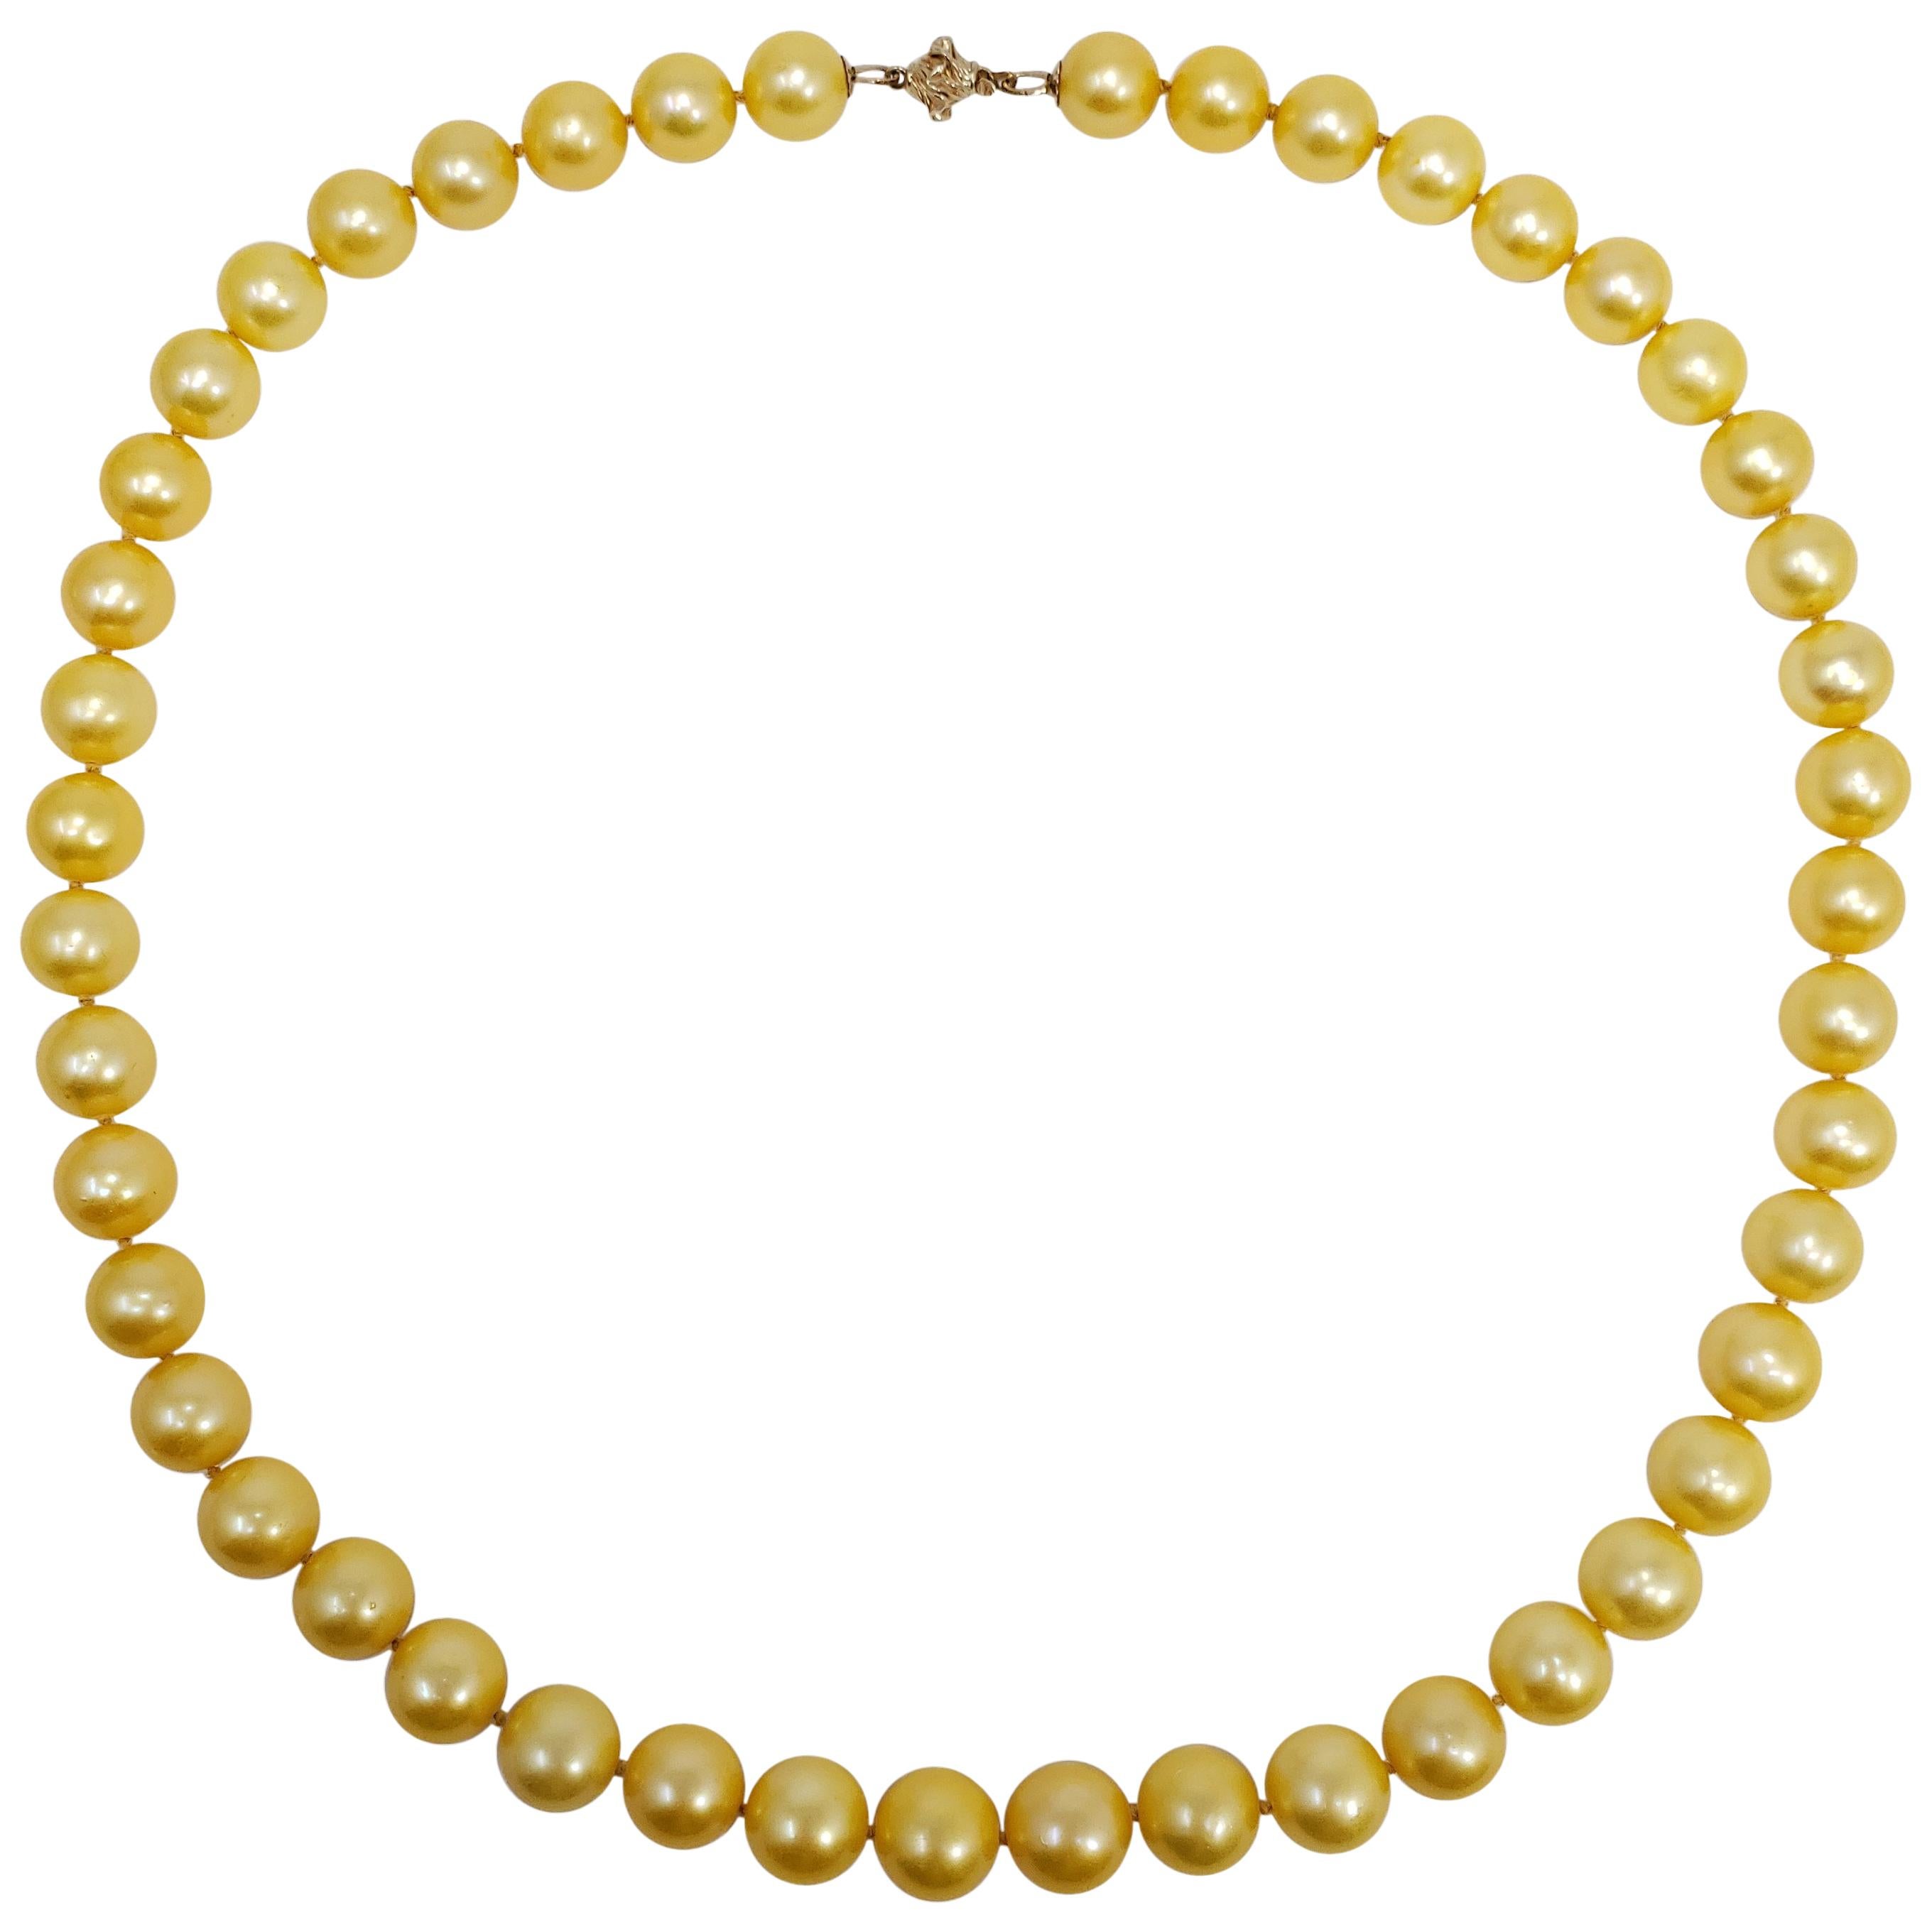 Genuine South Sea Pearl Bead Knotted String Necklace with 14 Karat Yellow Gold